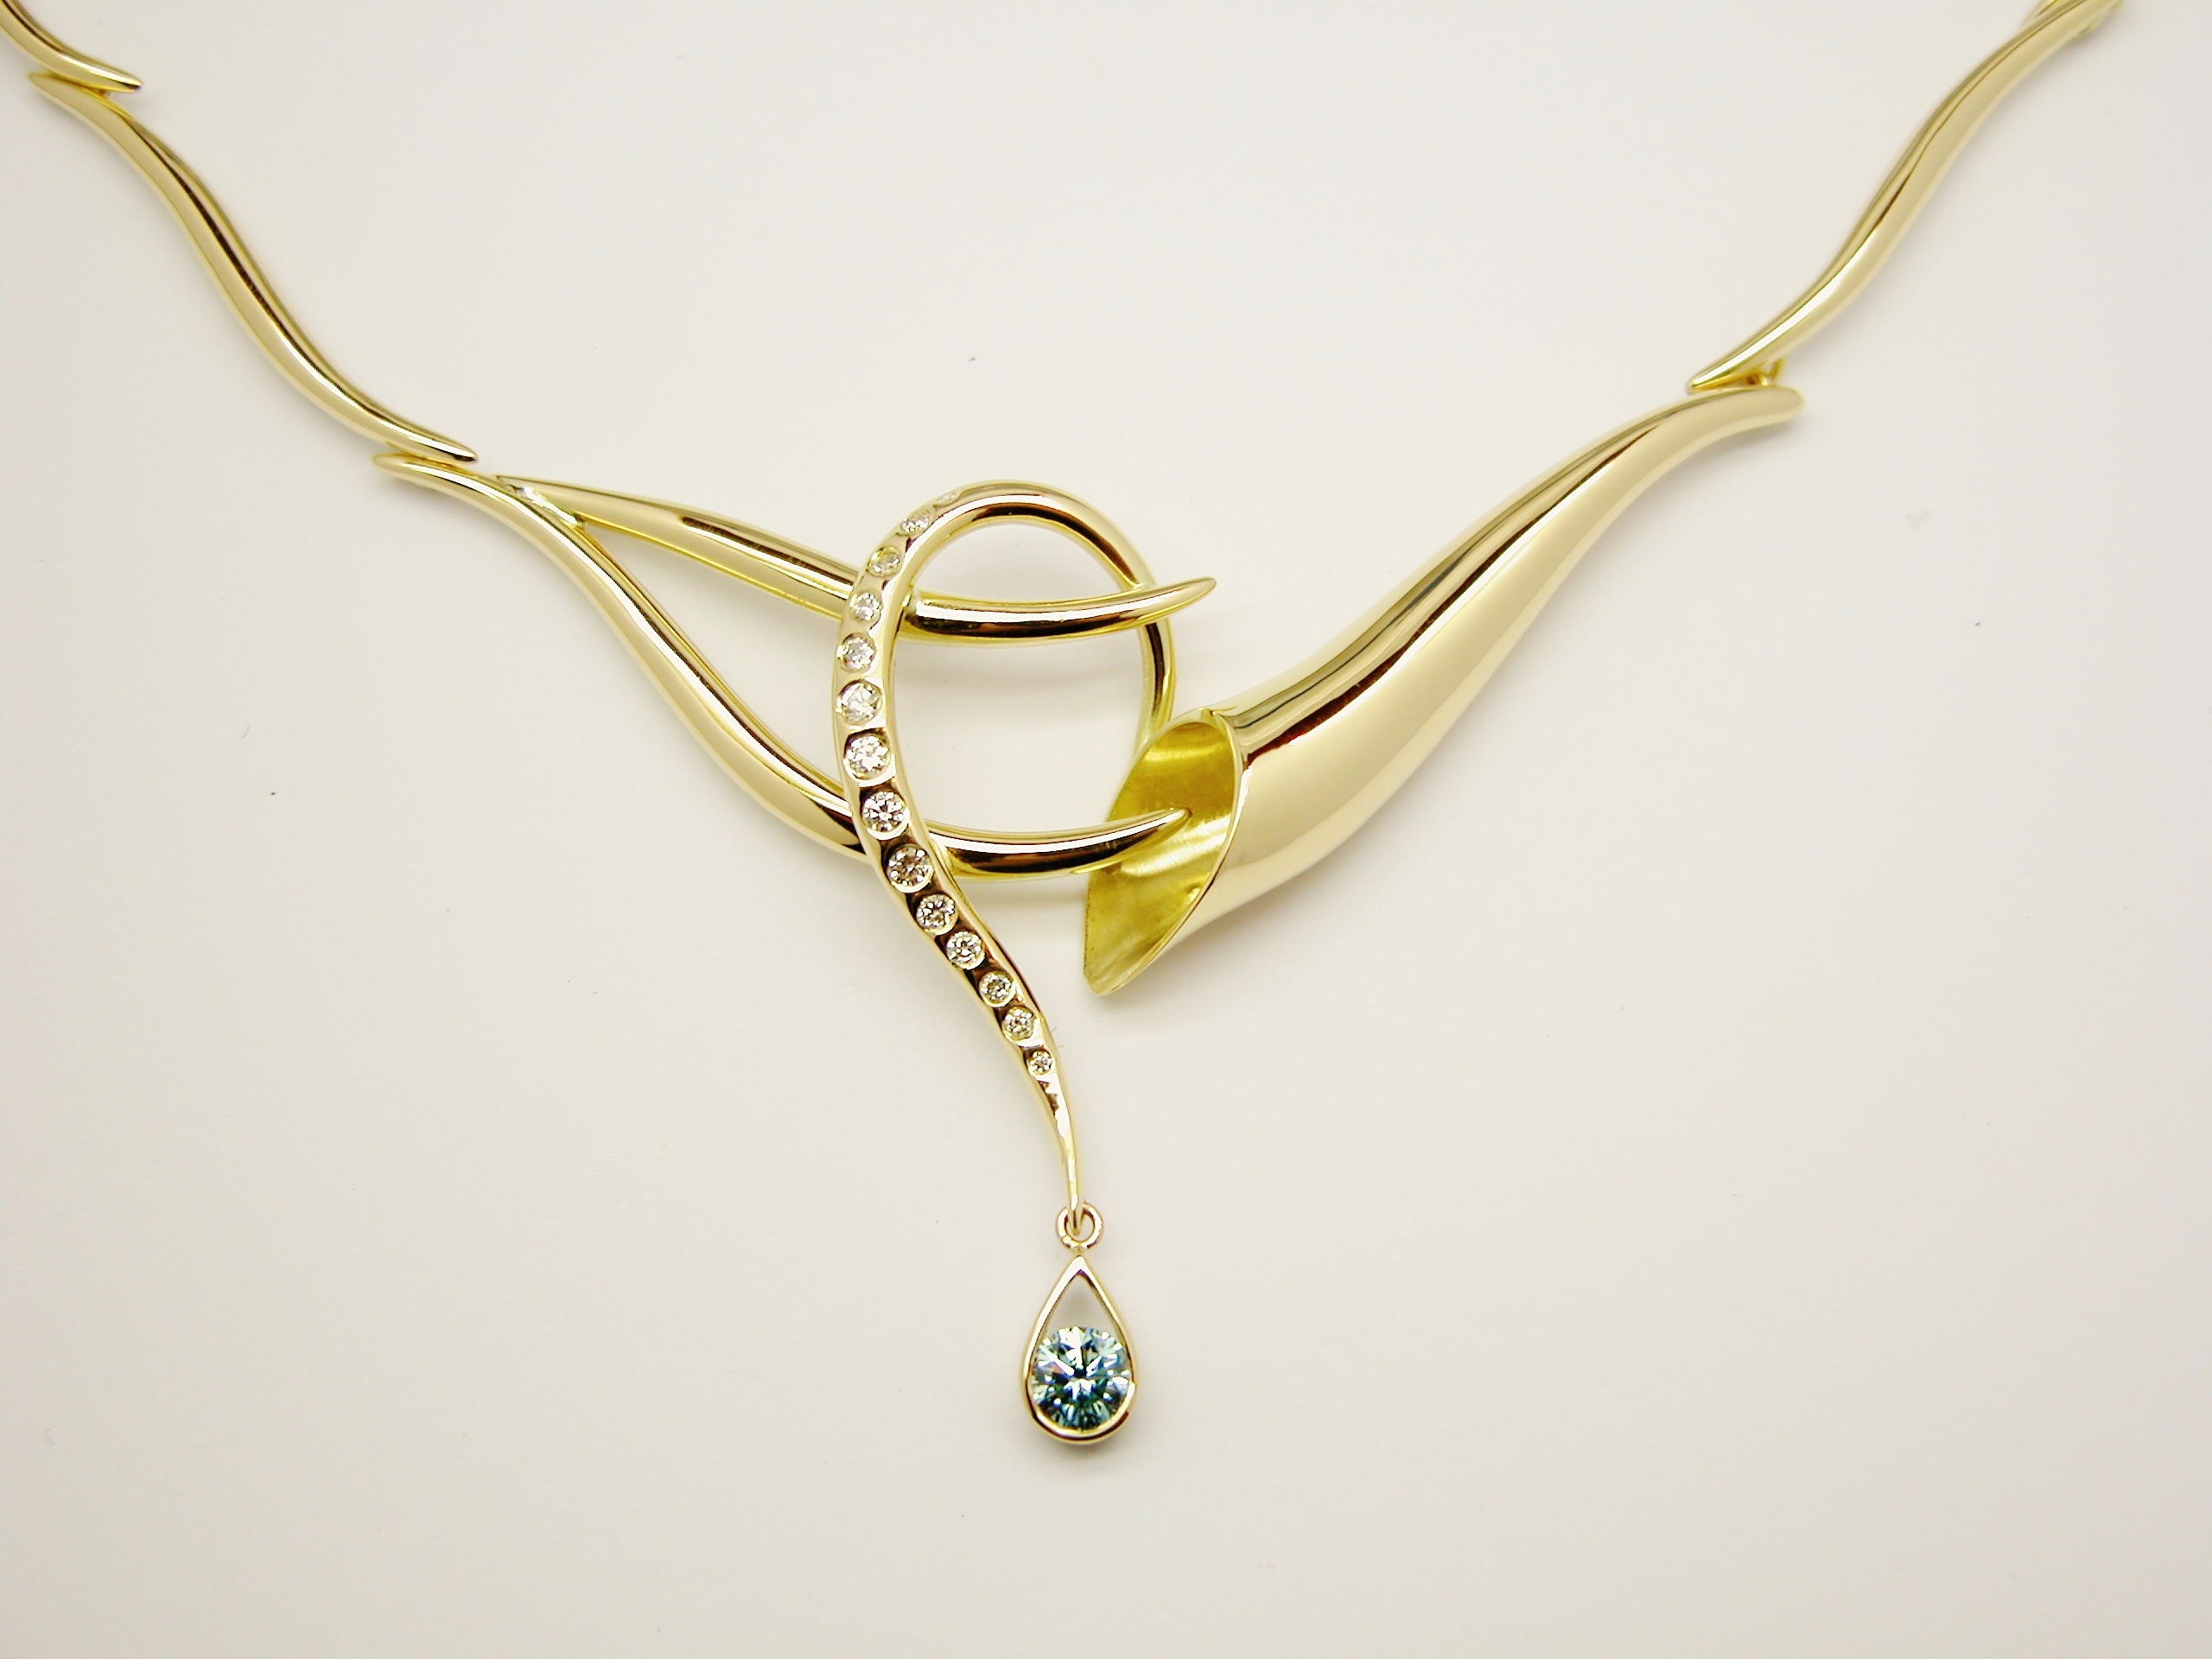 Hand crafted 18ct. yellow gold horn & loop shaped centre panel necklace flush set with round white diamonds and 1 sky blue round diamond & individually made links.